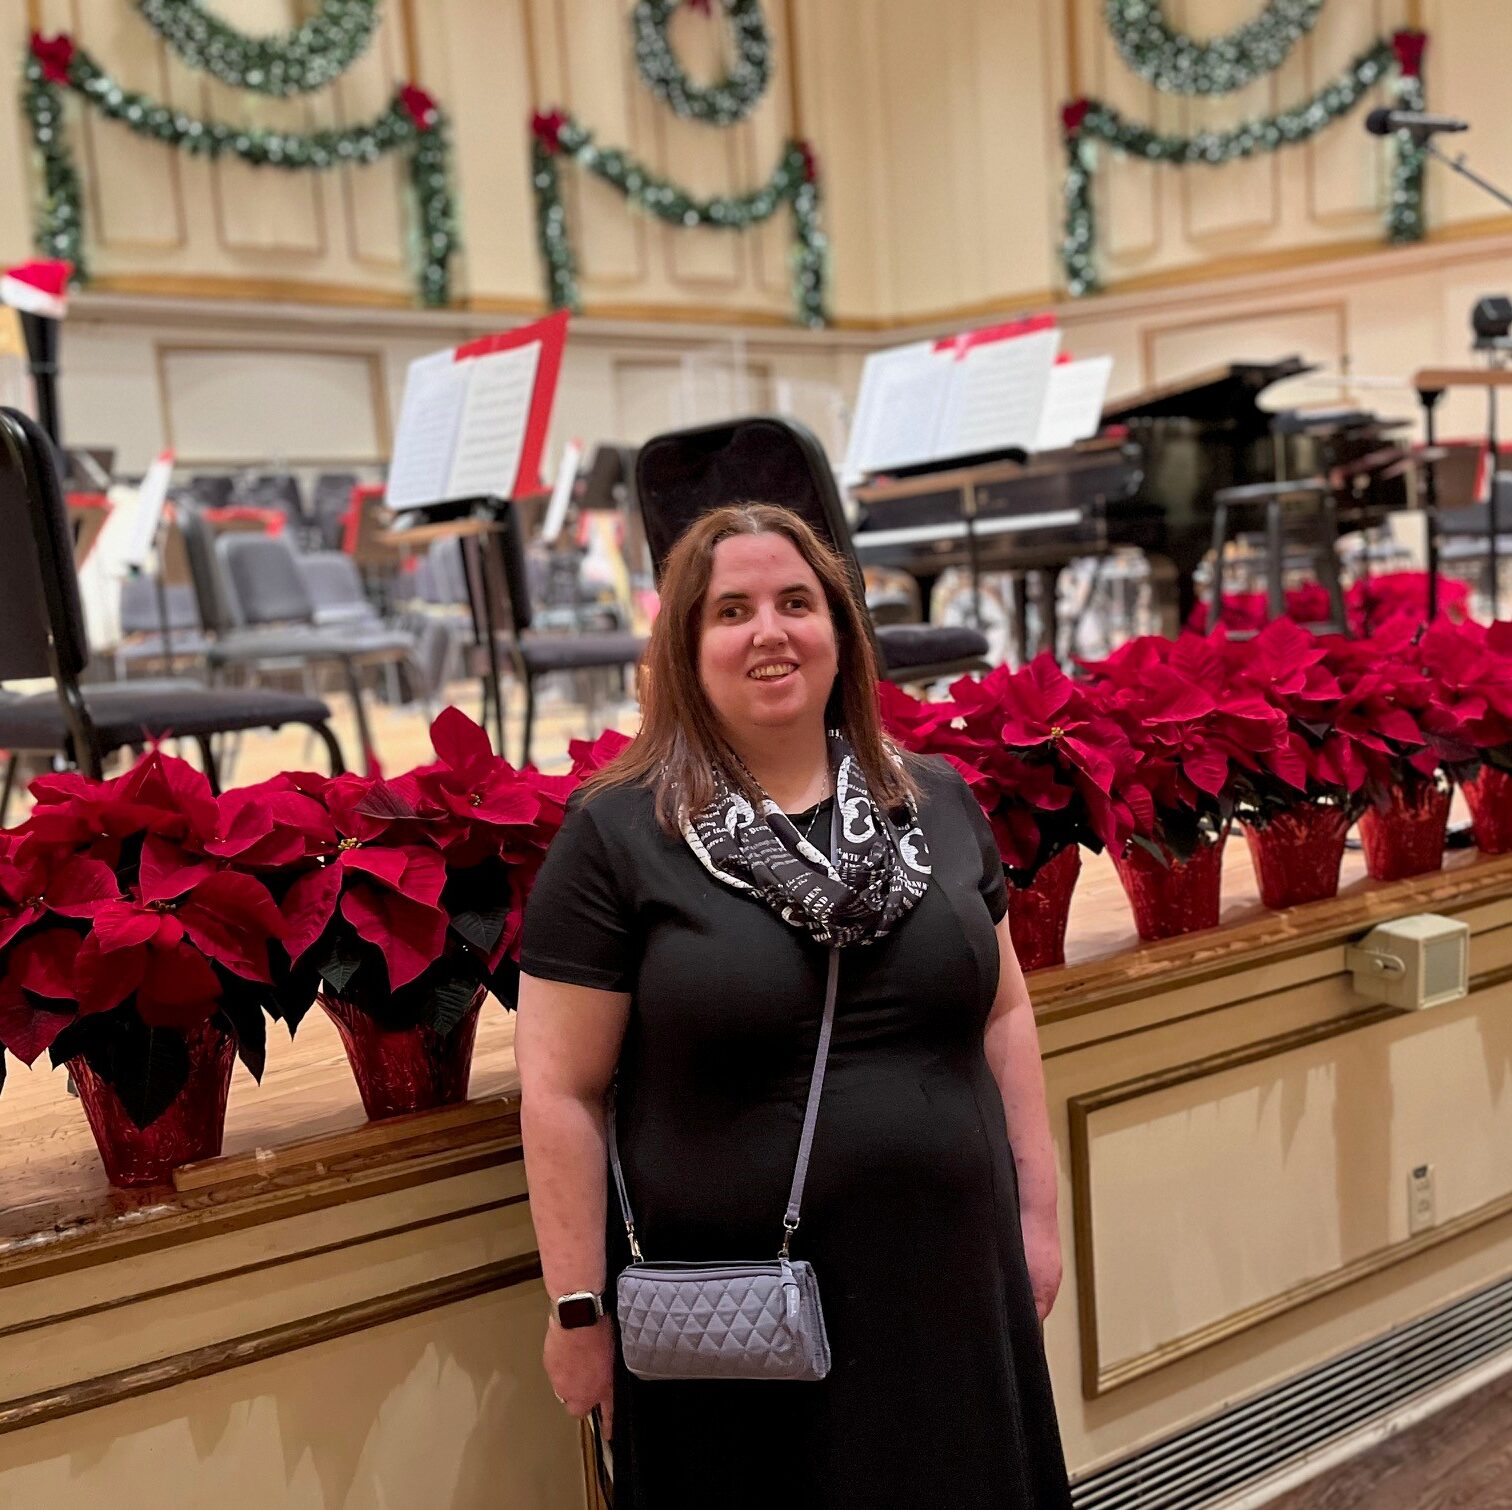 Female dressed in a black dress with gray over the shoulder purse. She is standing in front of a line of red poinsettias.